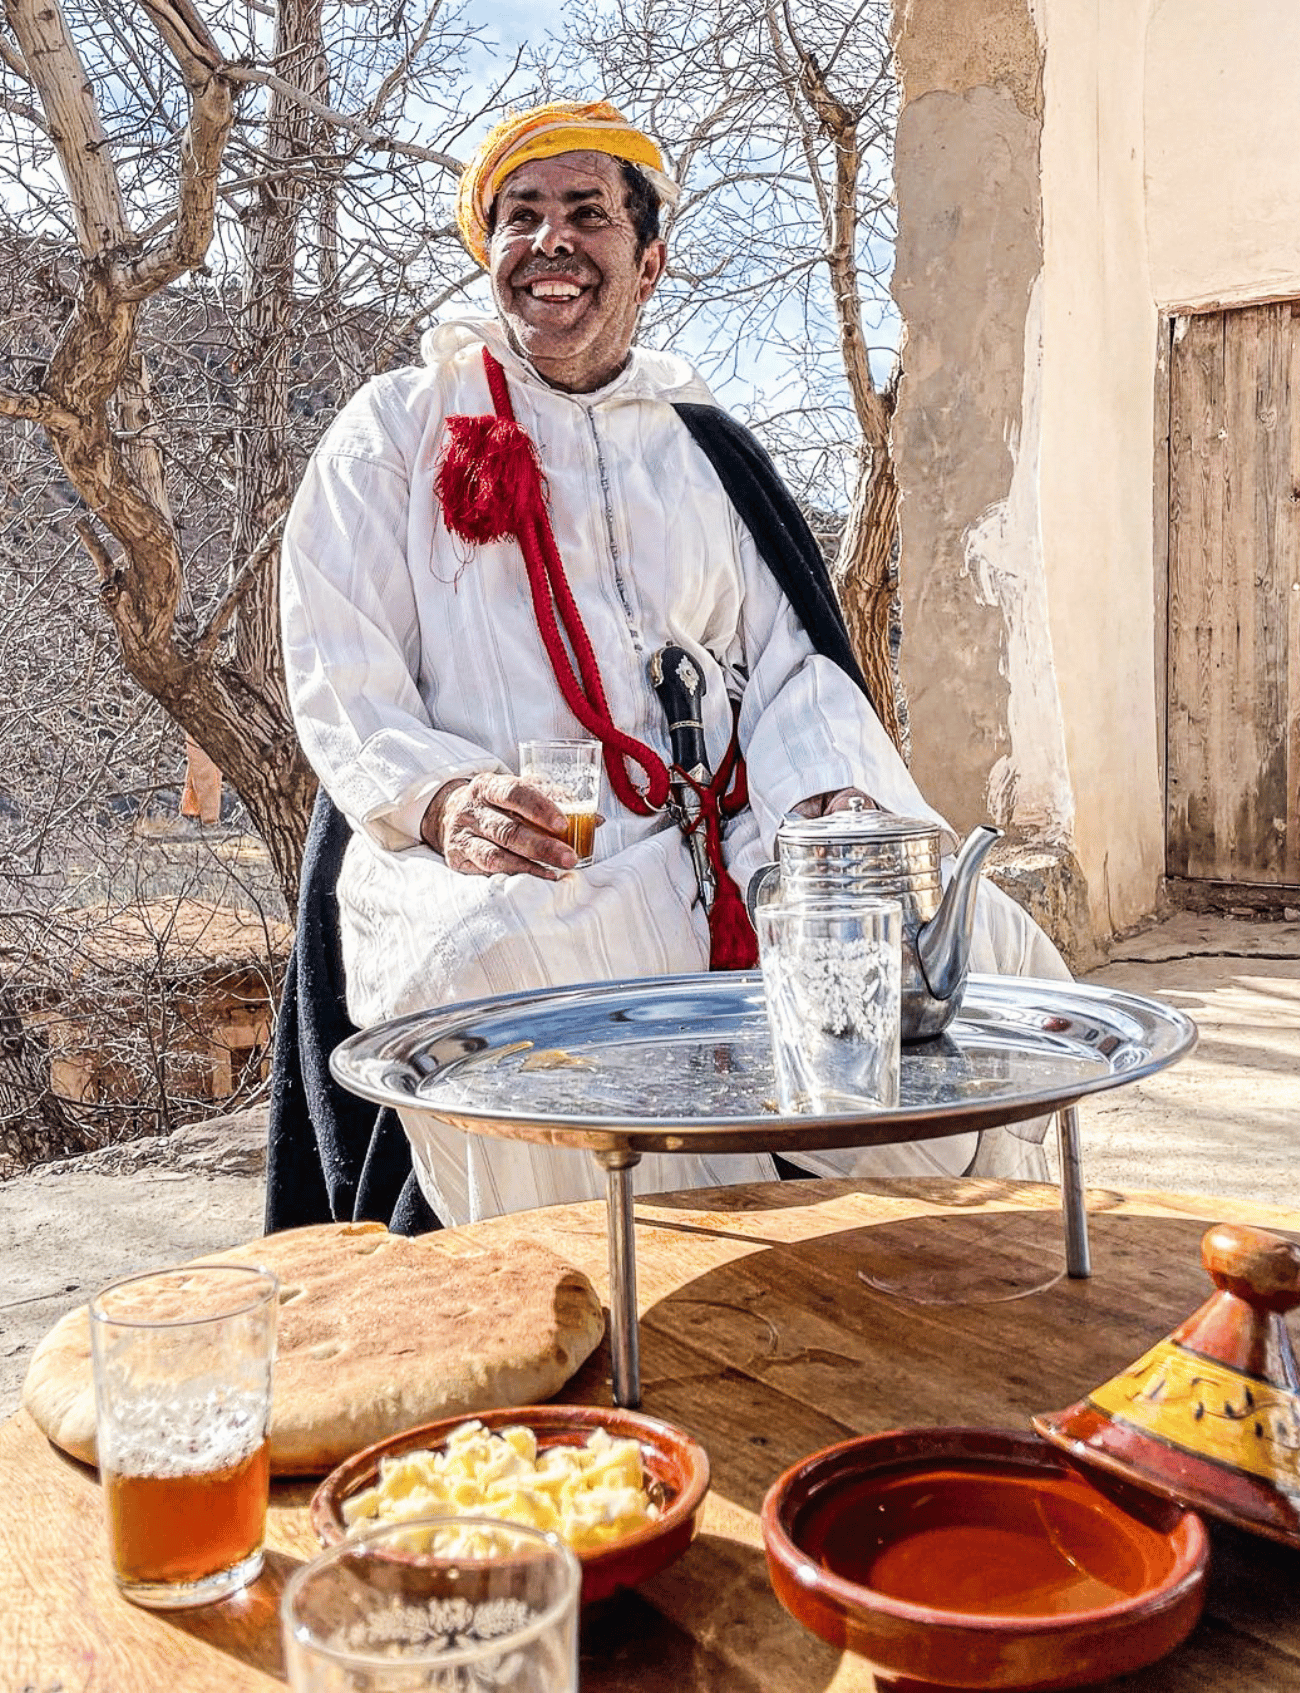 Smiling Moroccan man in traditional dress serving tea outdoors, with fresh bread and butter on the table.